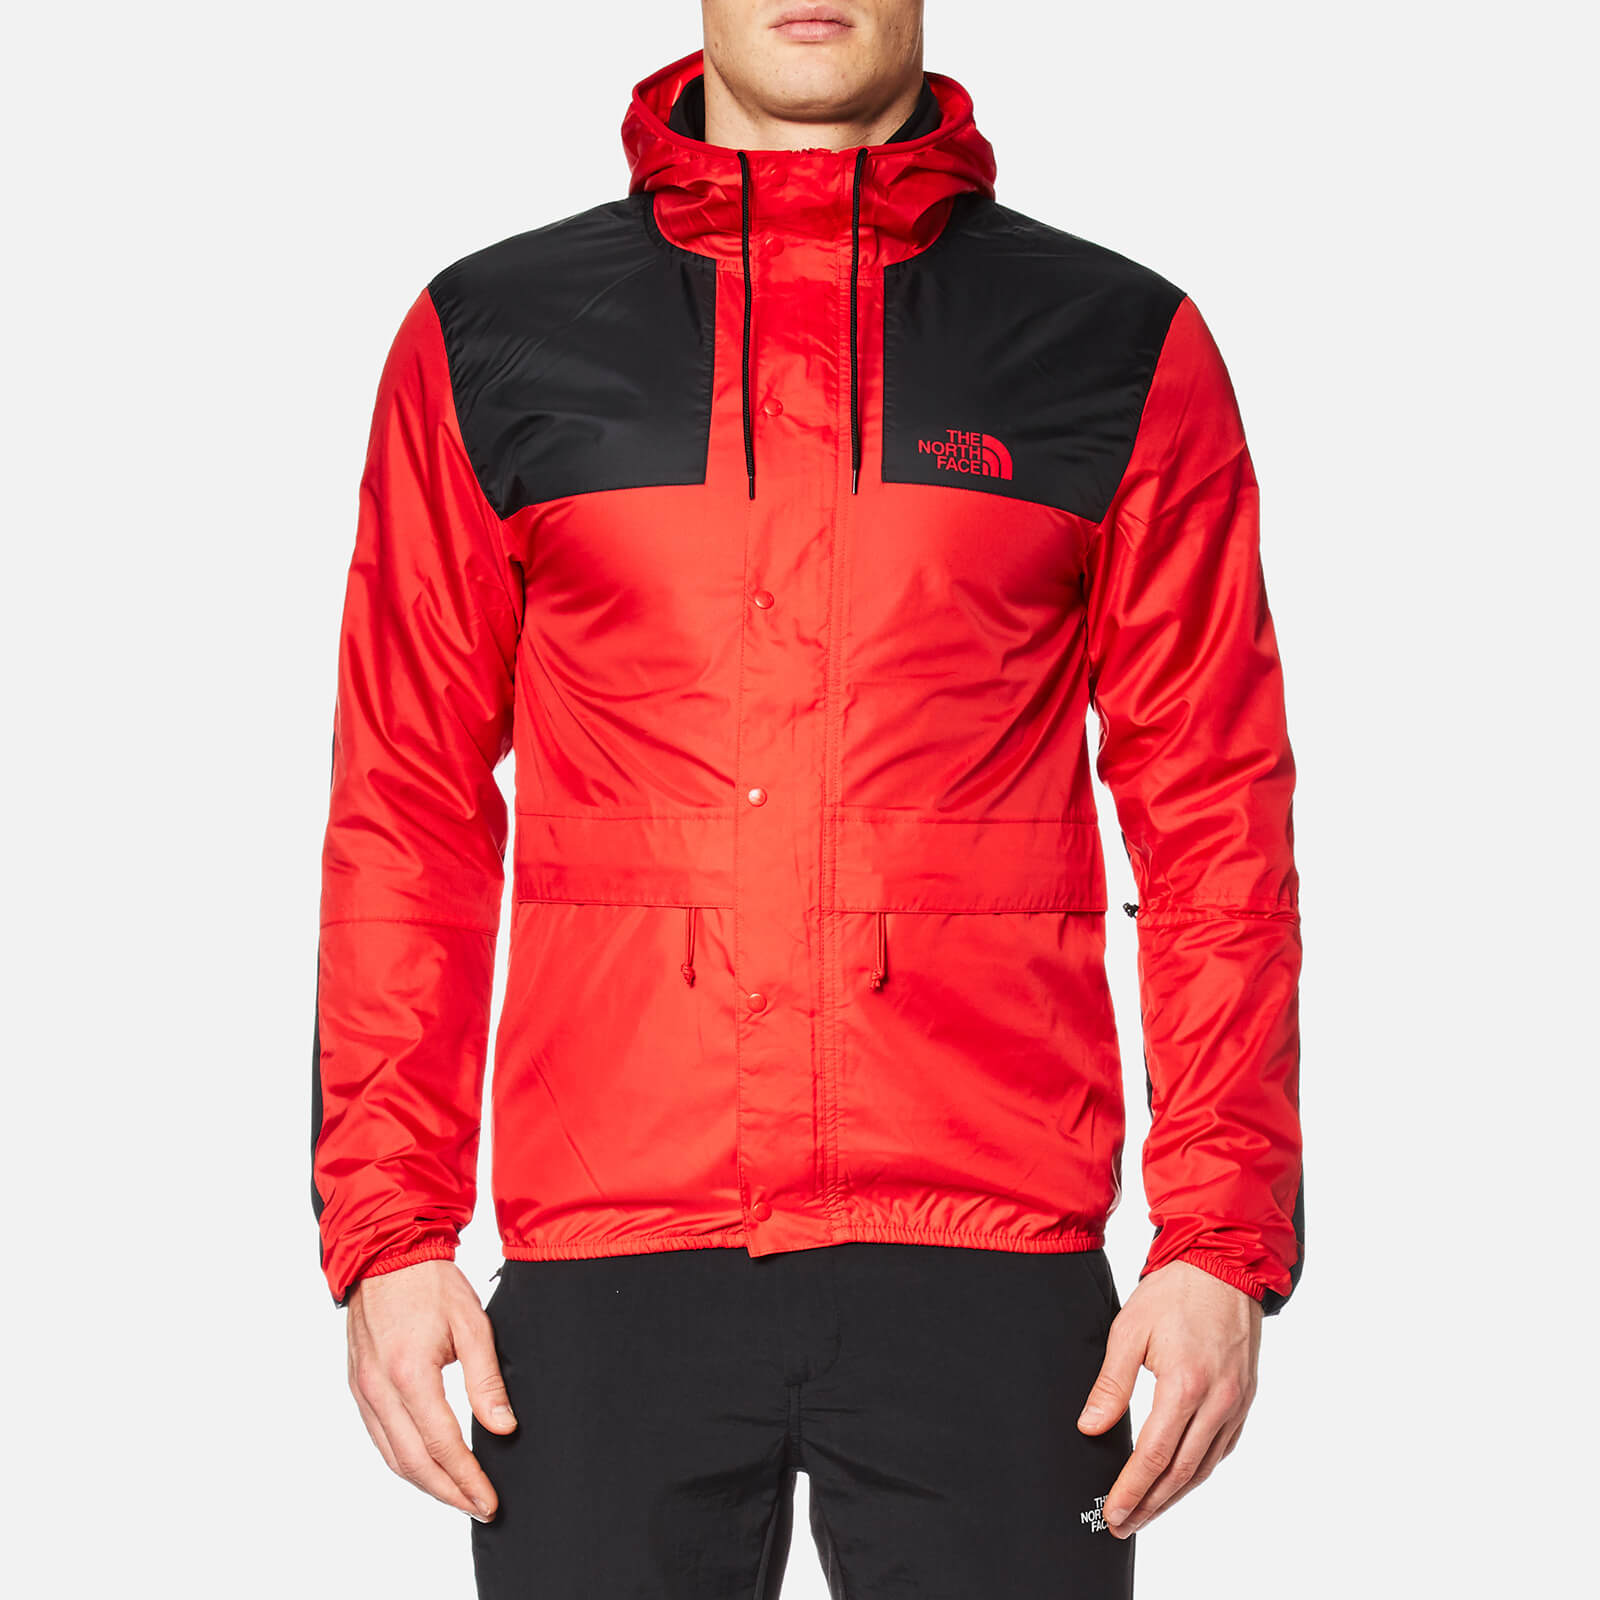 the north face 1985 mountain jacket red